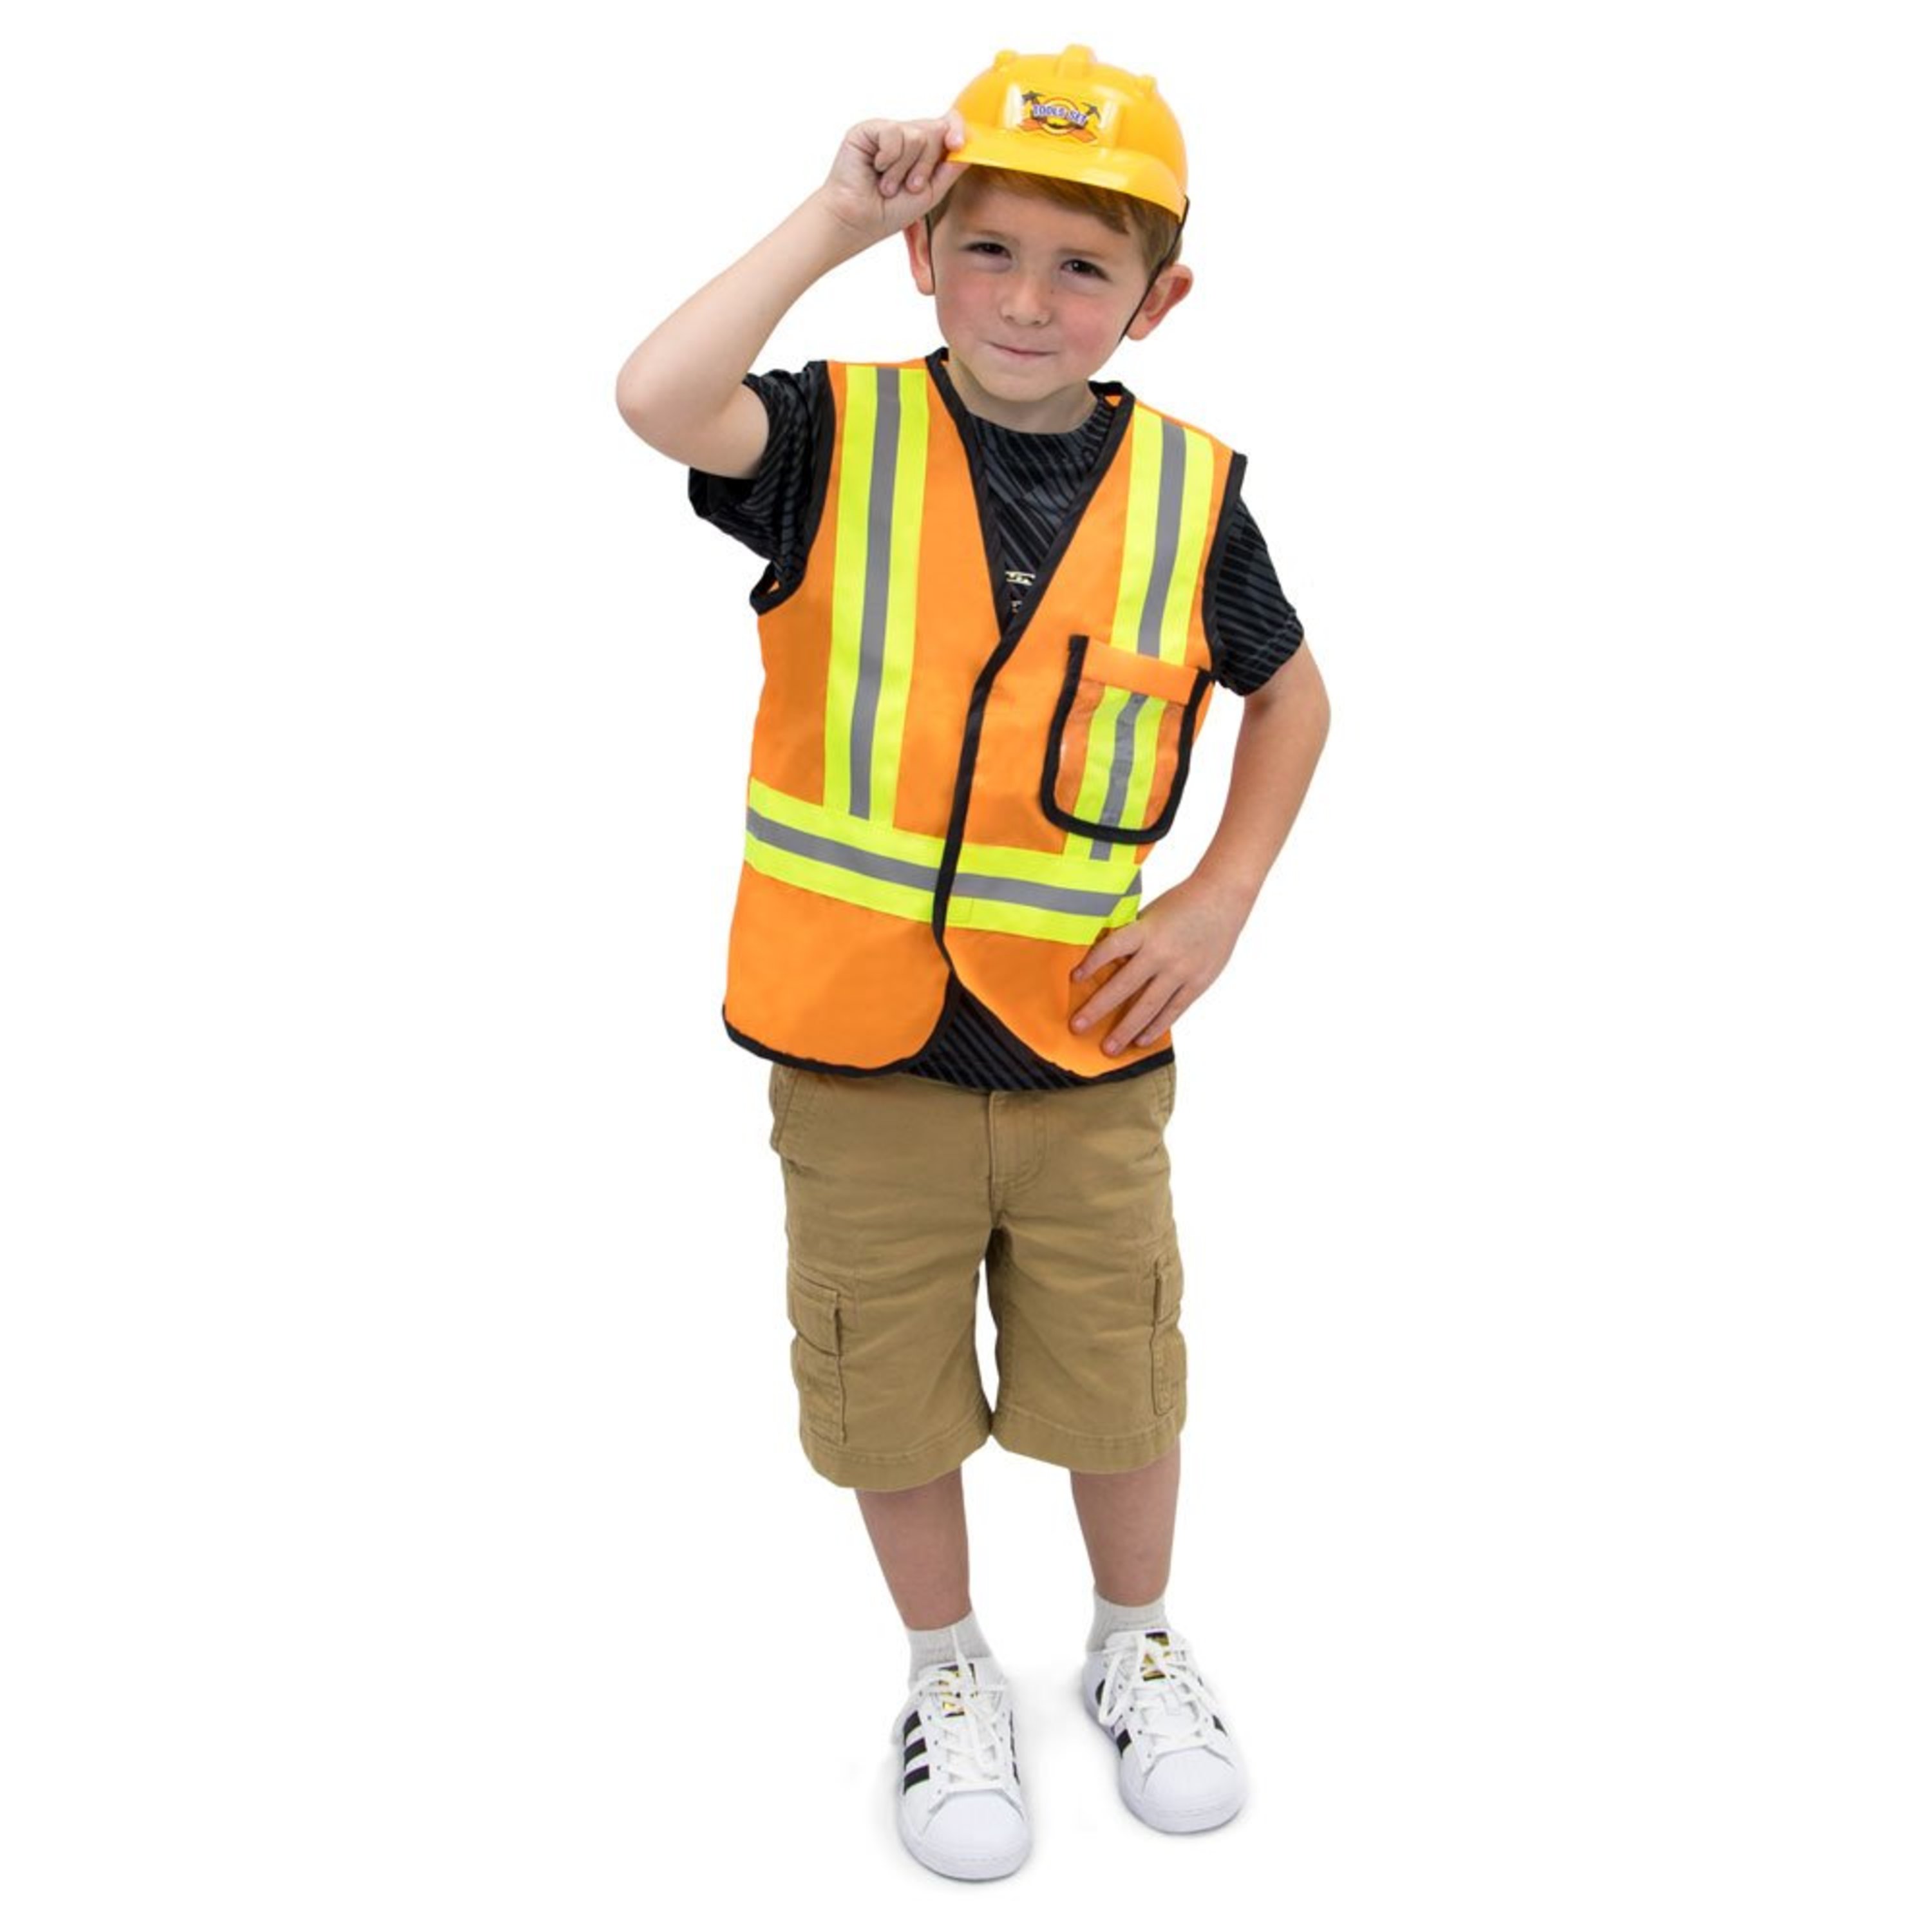 Construction Worker Children's Halloween Dress Up Roleplay Costume YS 3-4 - image 1 of 7